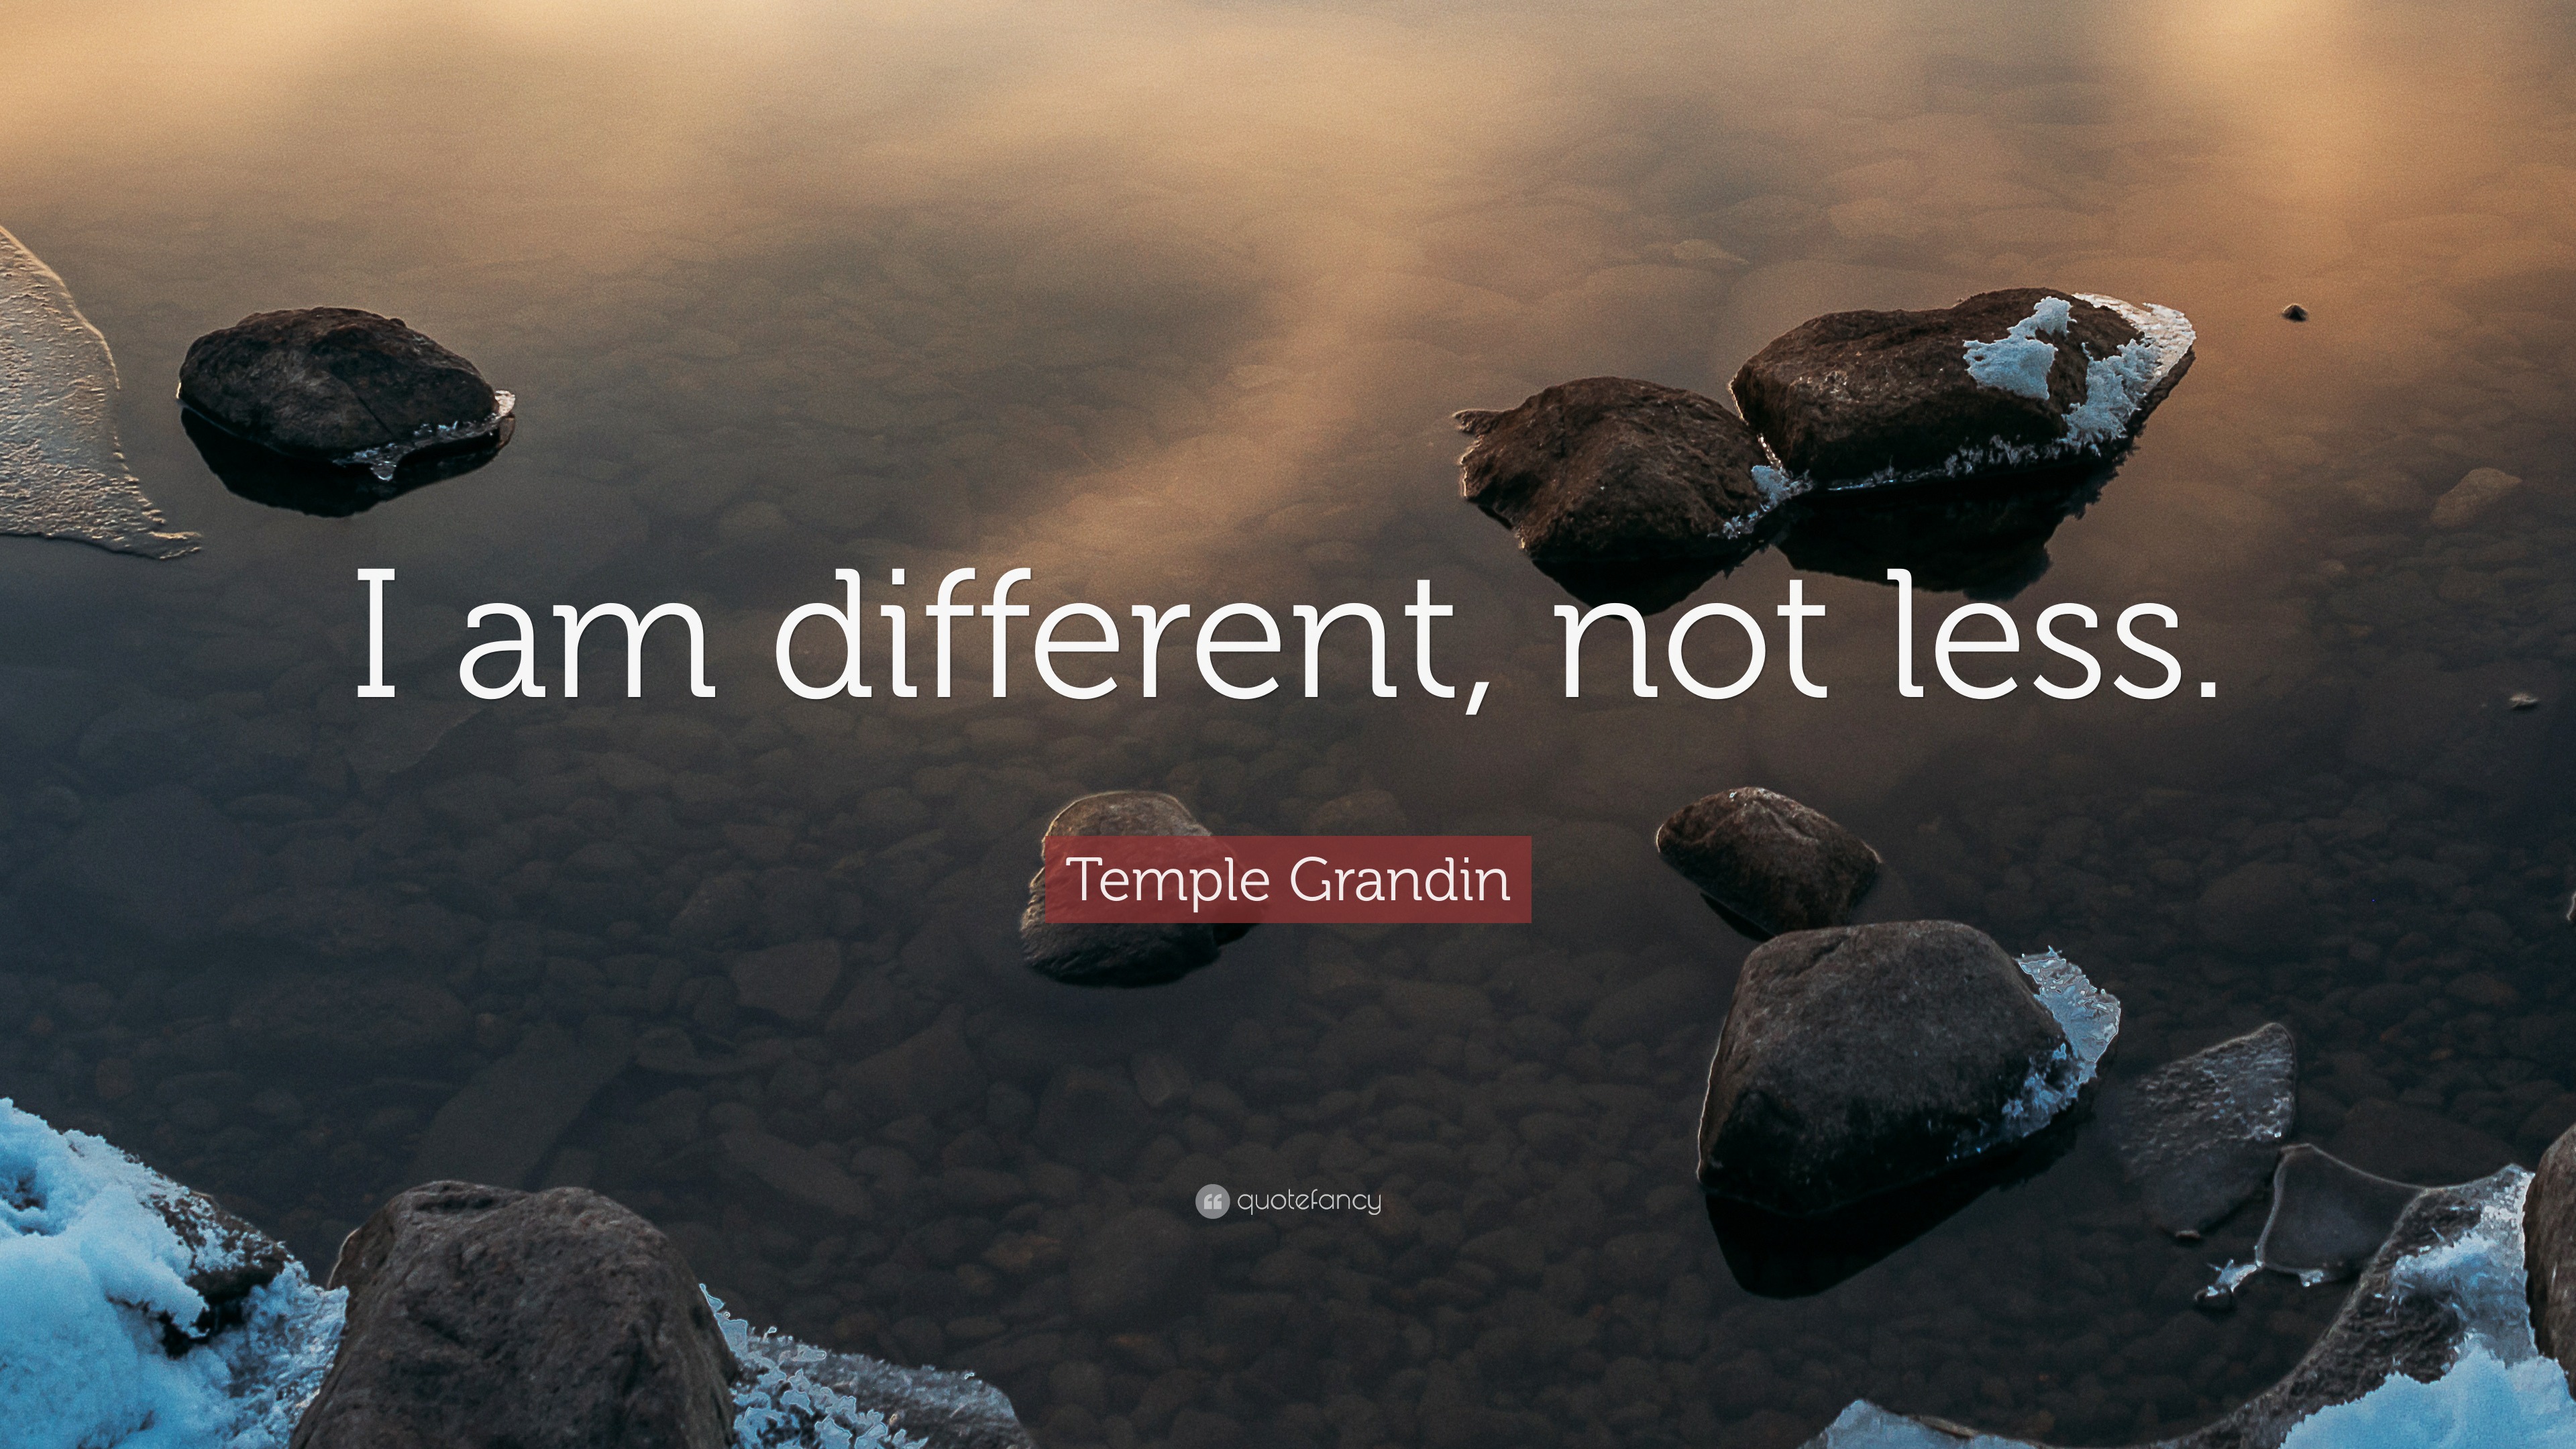 Temple Grandin Quote: “I am different, not less.” (12 wallpapers